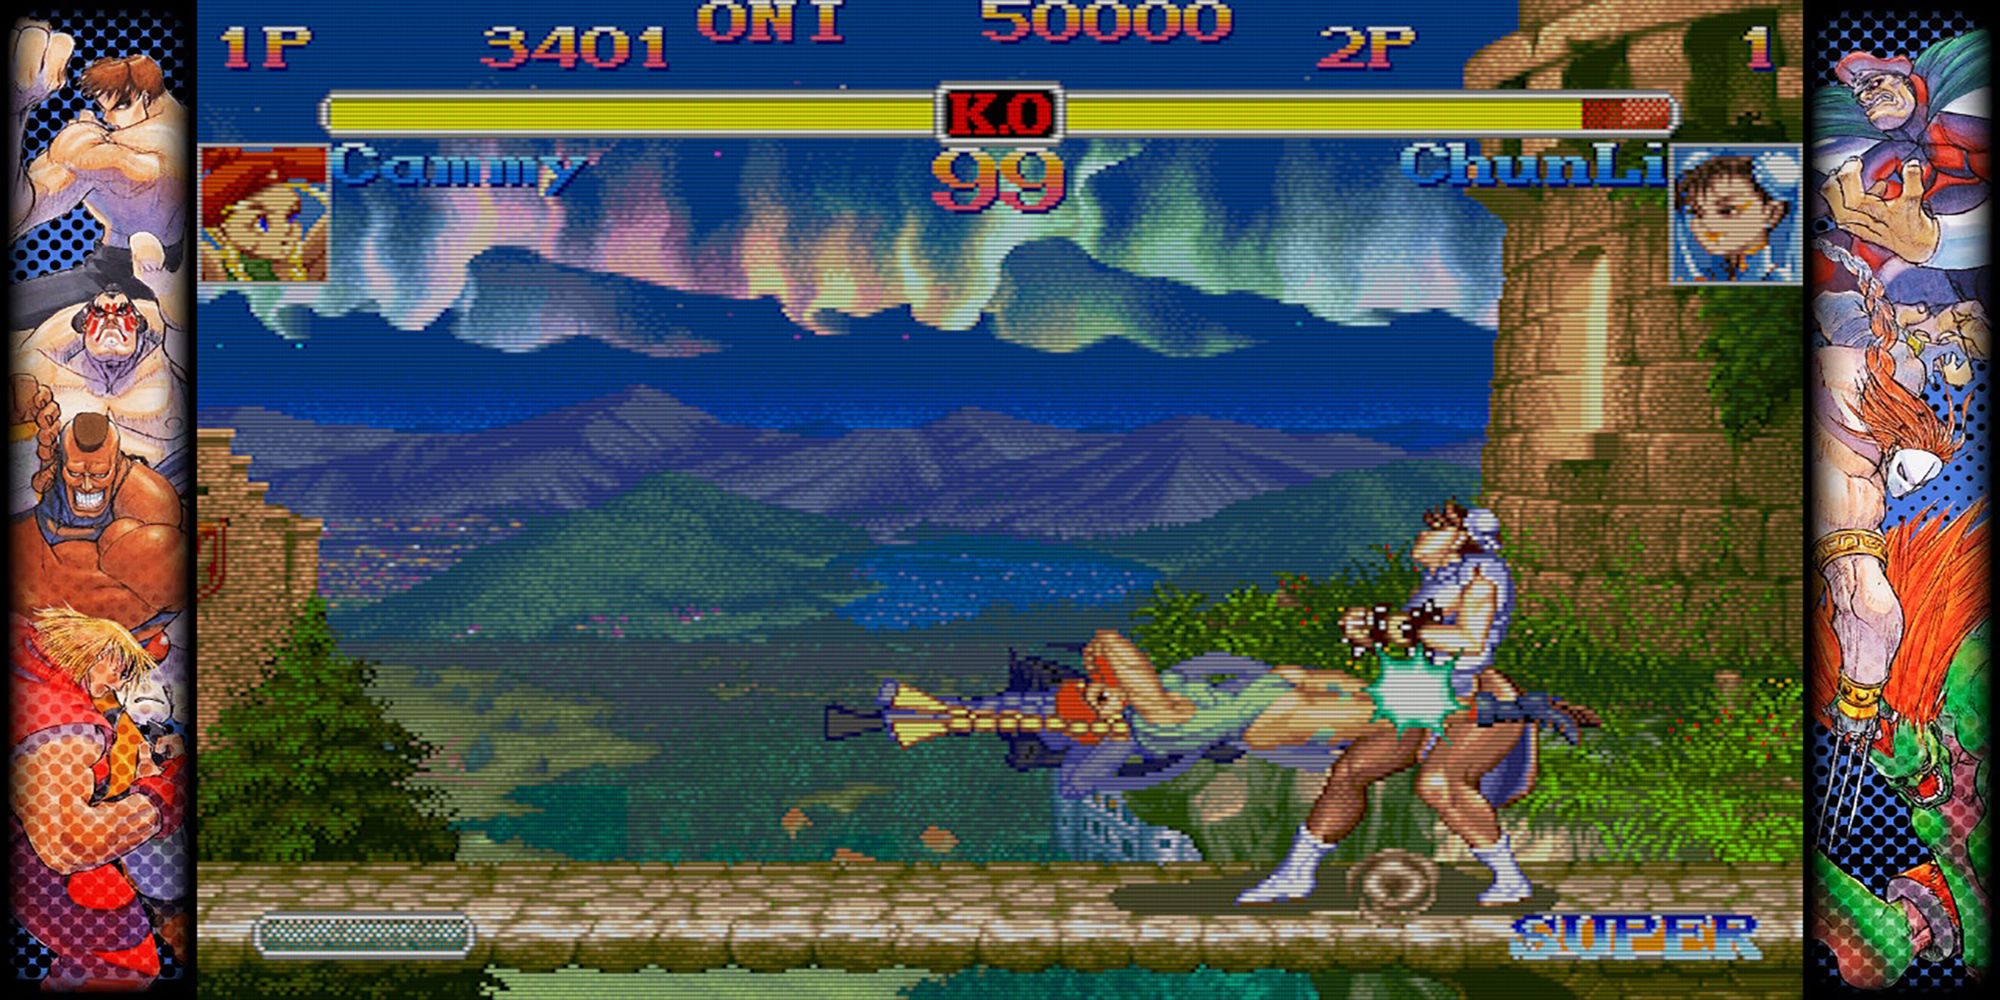 Cammy pierces Chun-li with her Spiral Arrow attack atop of a British manor in Hyper Street Fighter 2, a game in Capcom Fighting Collection.